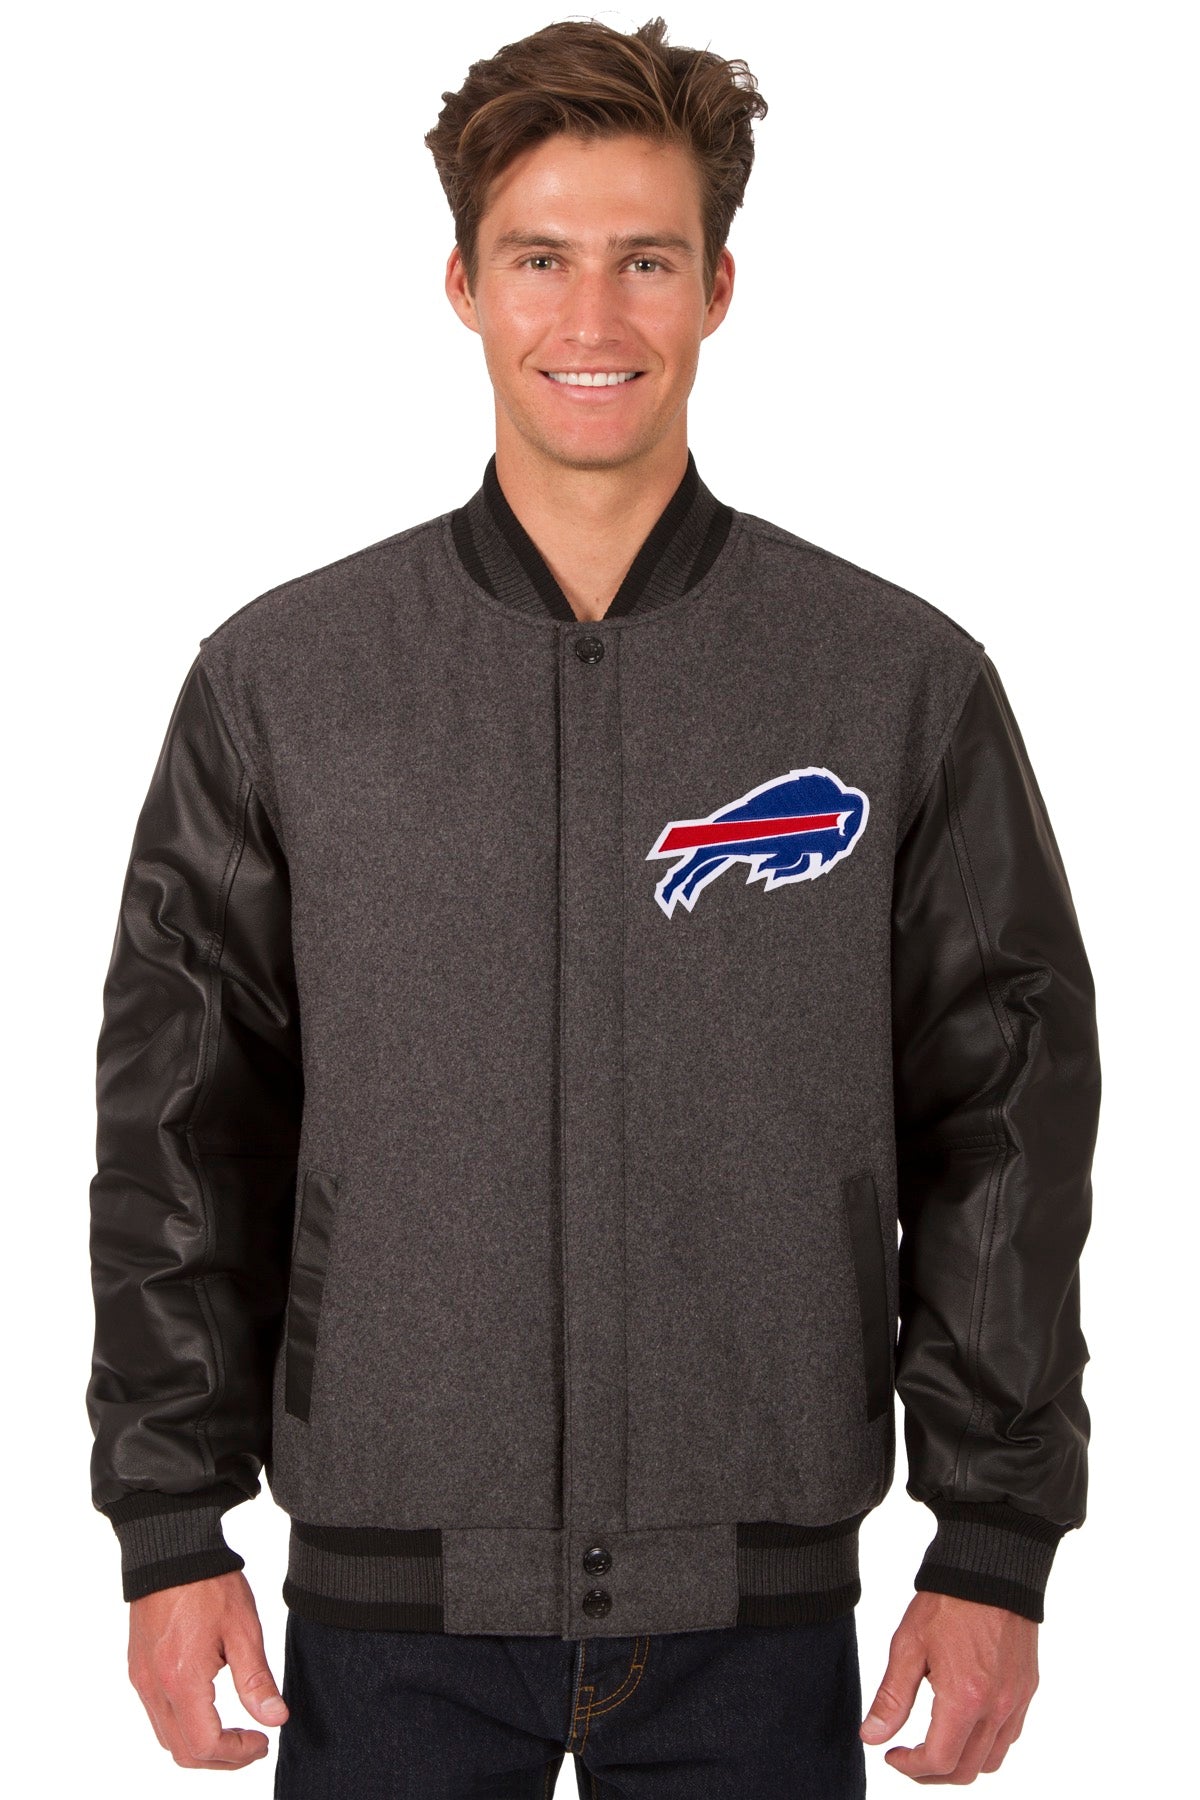 Men's JH Design Charcoal Buffalo Bills Wool & Leather Reversible Jacket with Embroidered Logos Size: Small